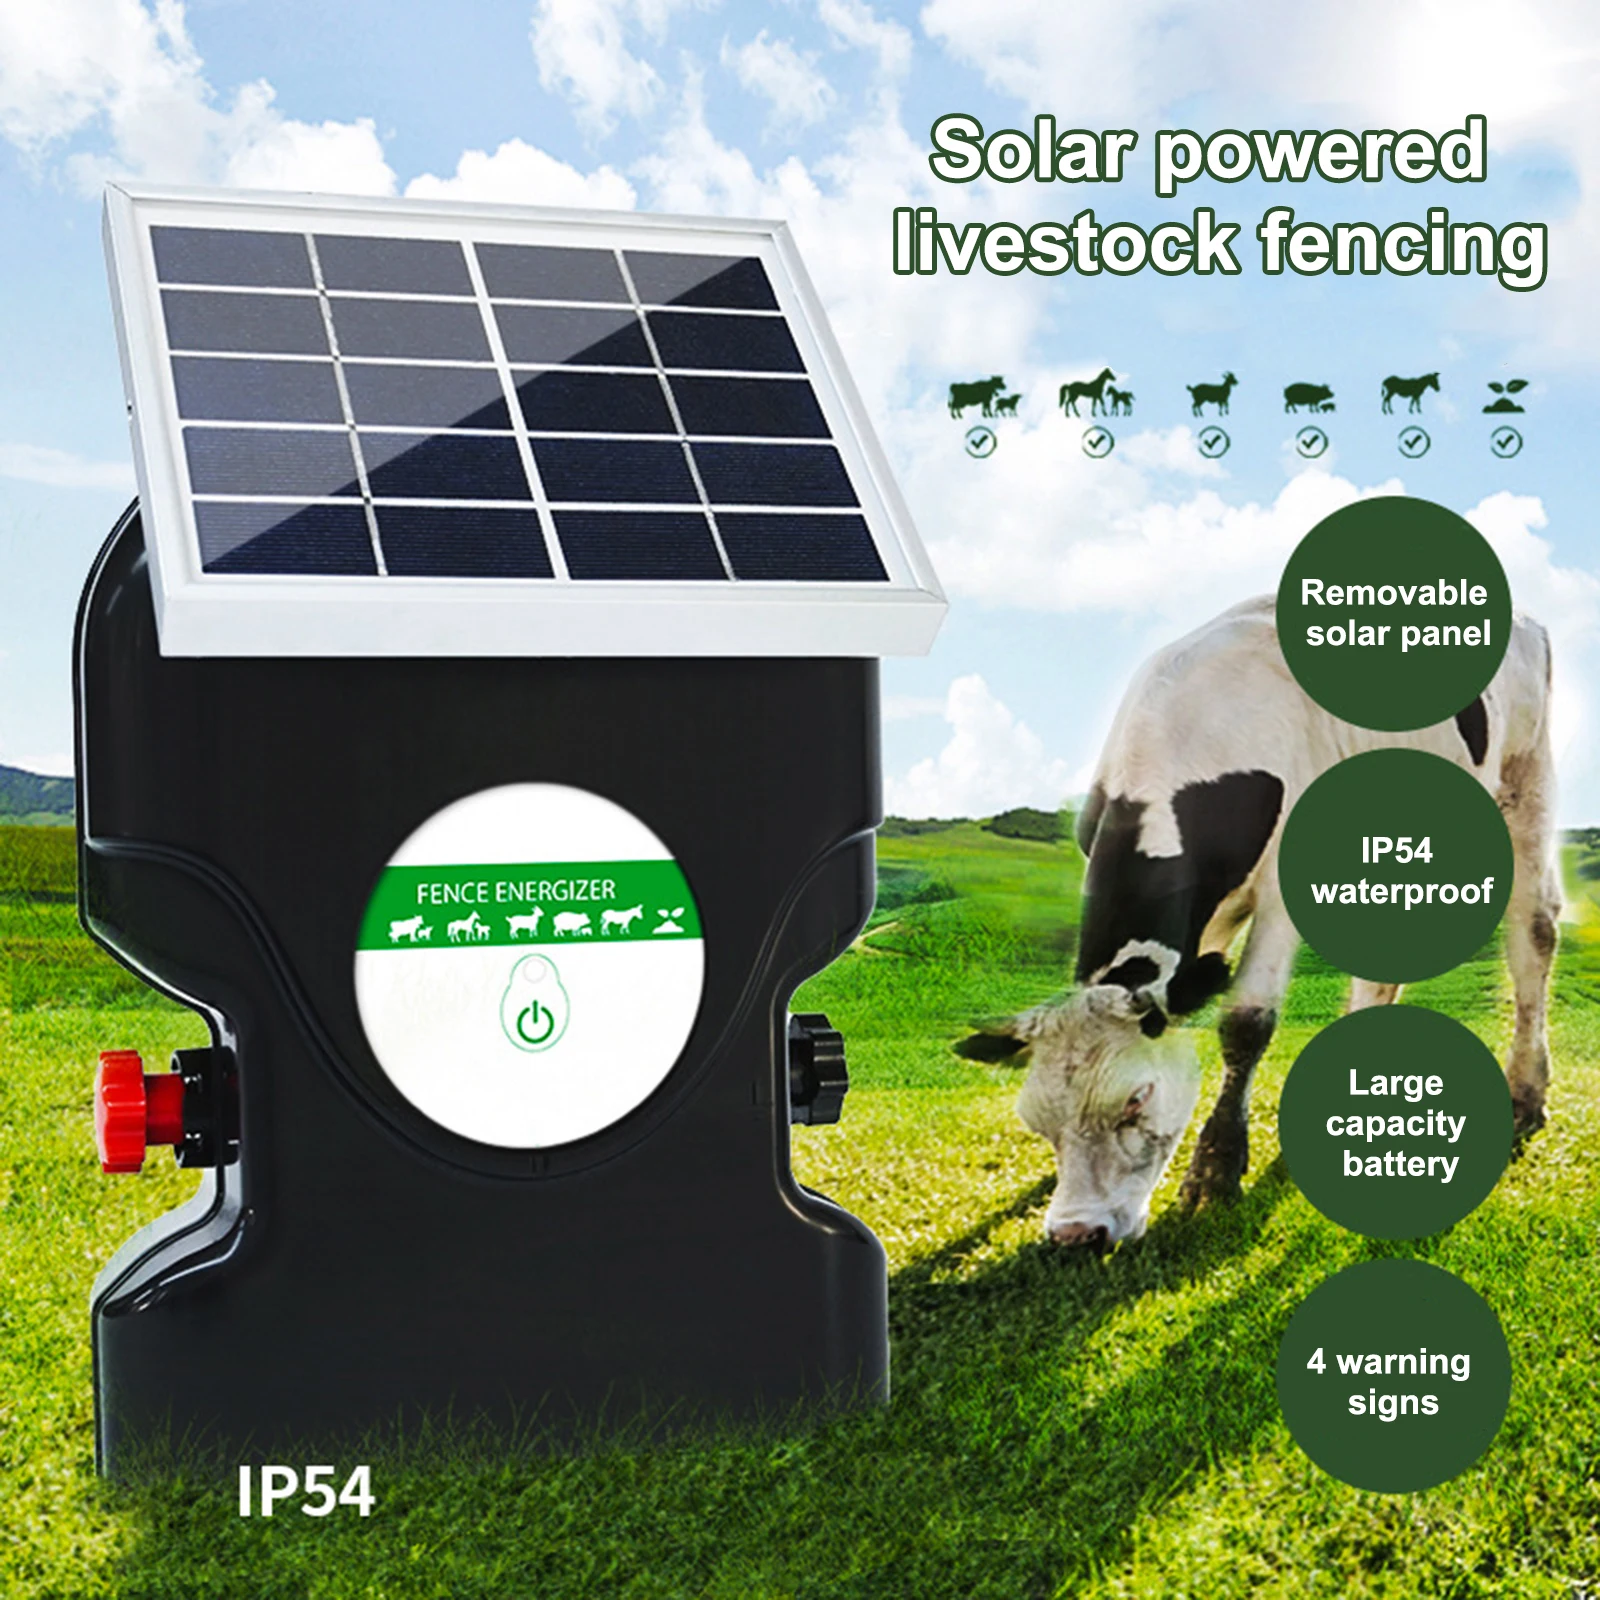 

Solar Electric Fence Energizer 0.3 Joule Farm Fence Voltage Booster Cattle Horses Sheep Electric Fence Accessories